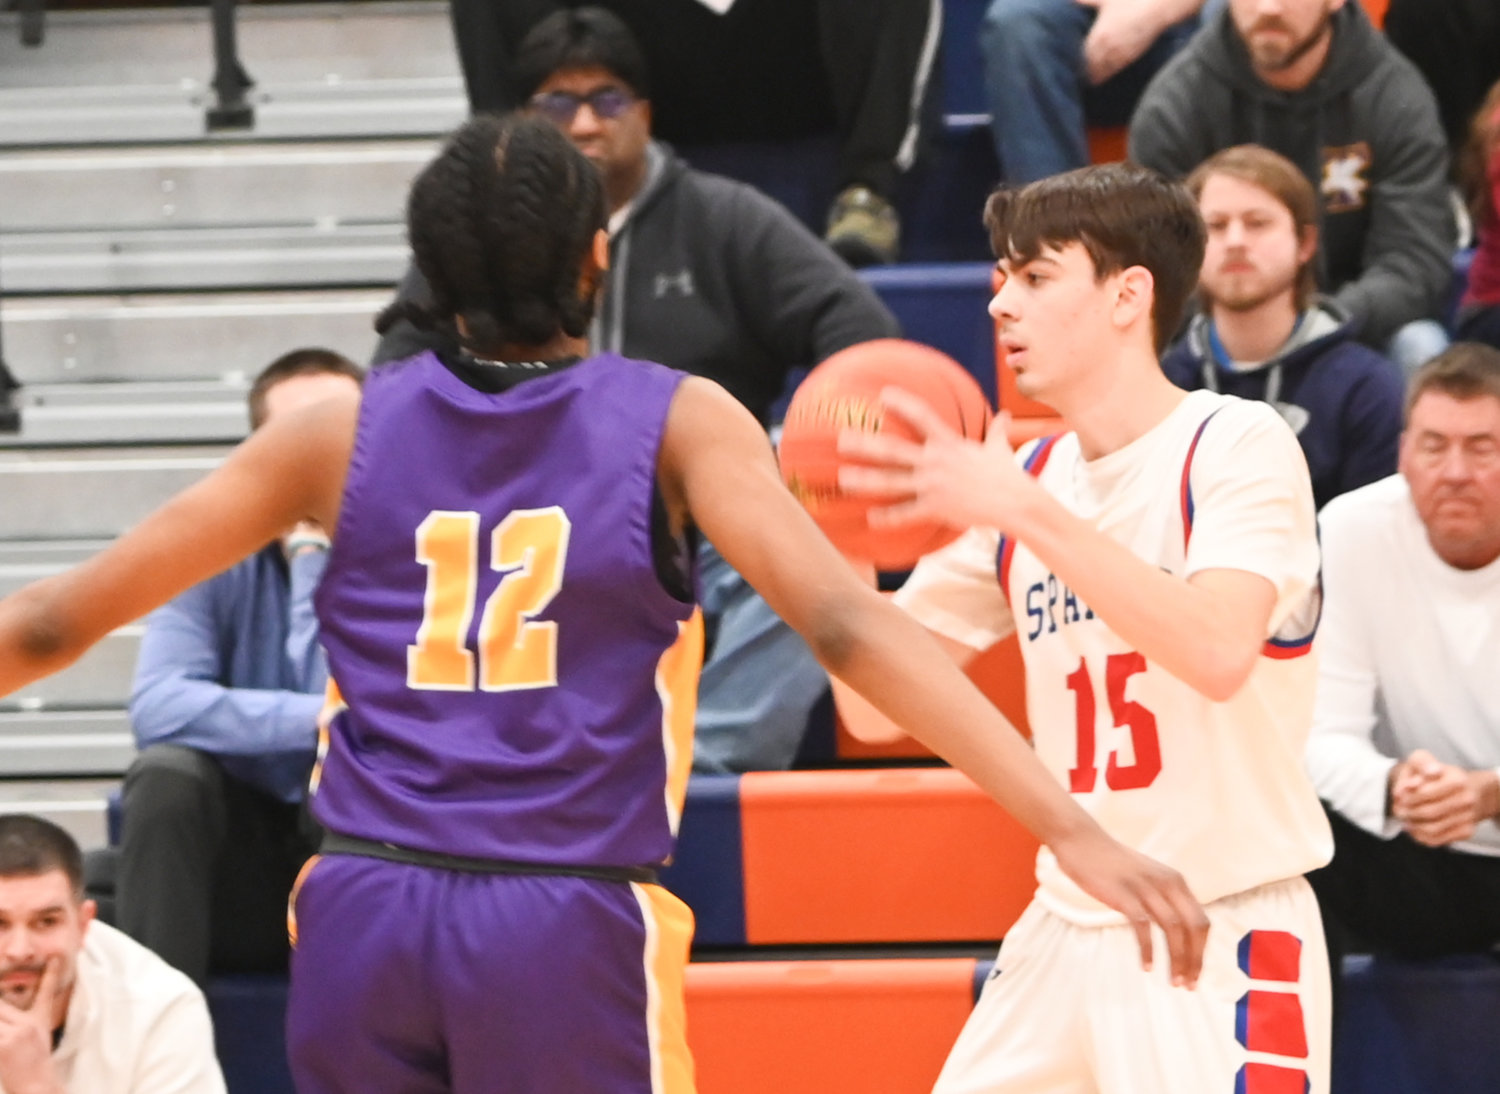 New Hartford's Jameson Stockwell (15) looks to make a play on Wednesday against Troy in a Class A subregional game at Liverpool High School. Stockwell finished with 28 points -- including 20 in the second half -- to help New Hartford to a 69-60 win.